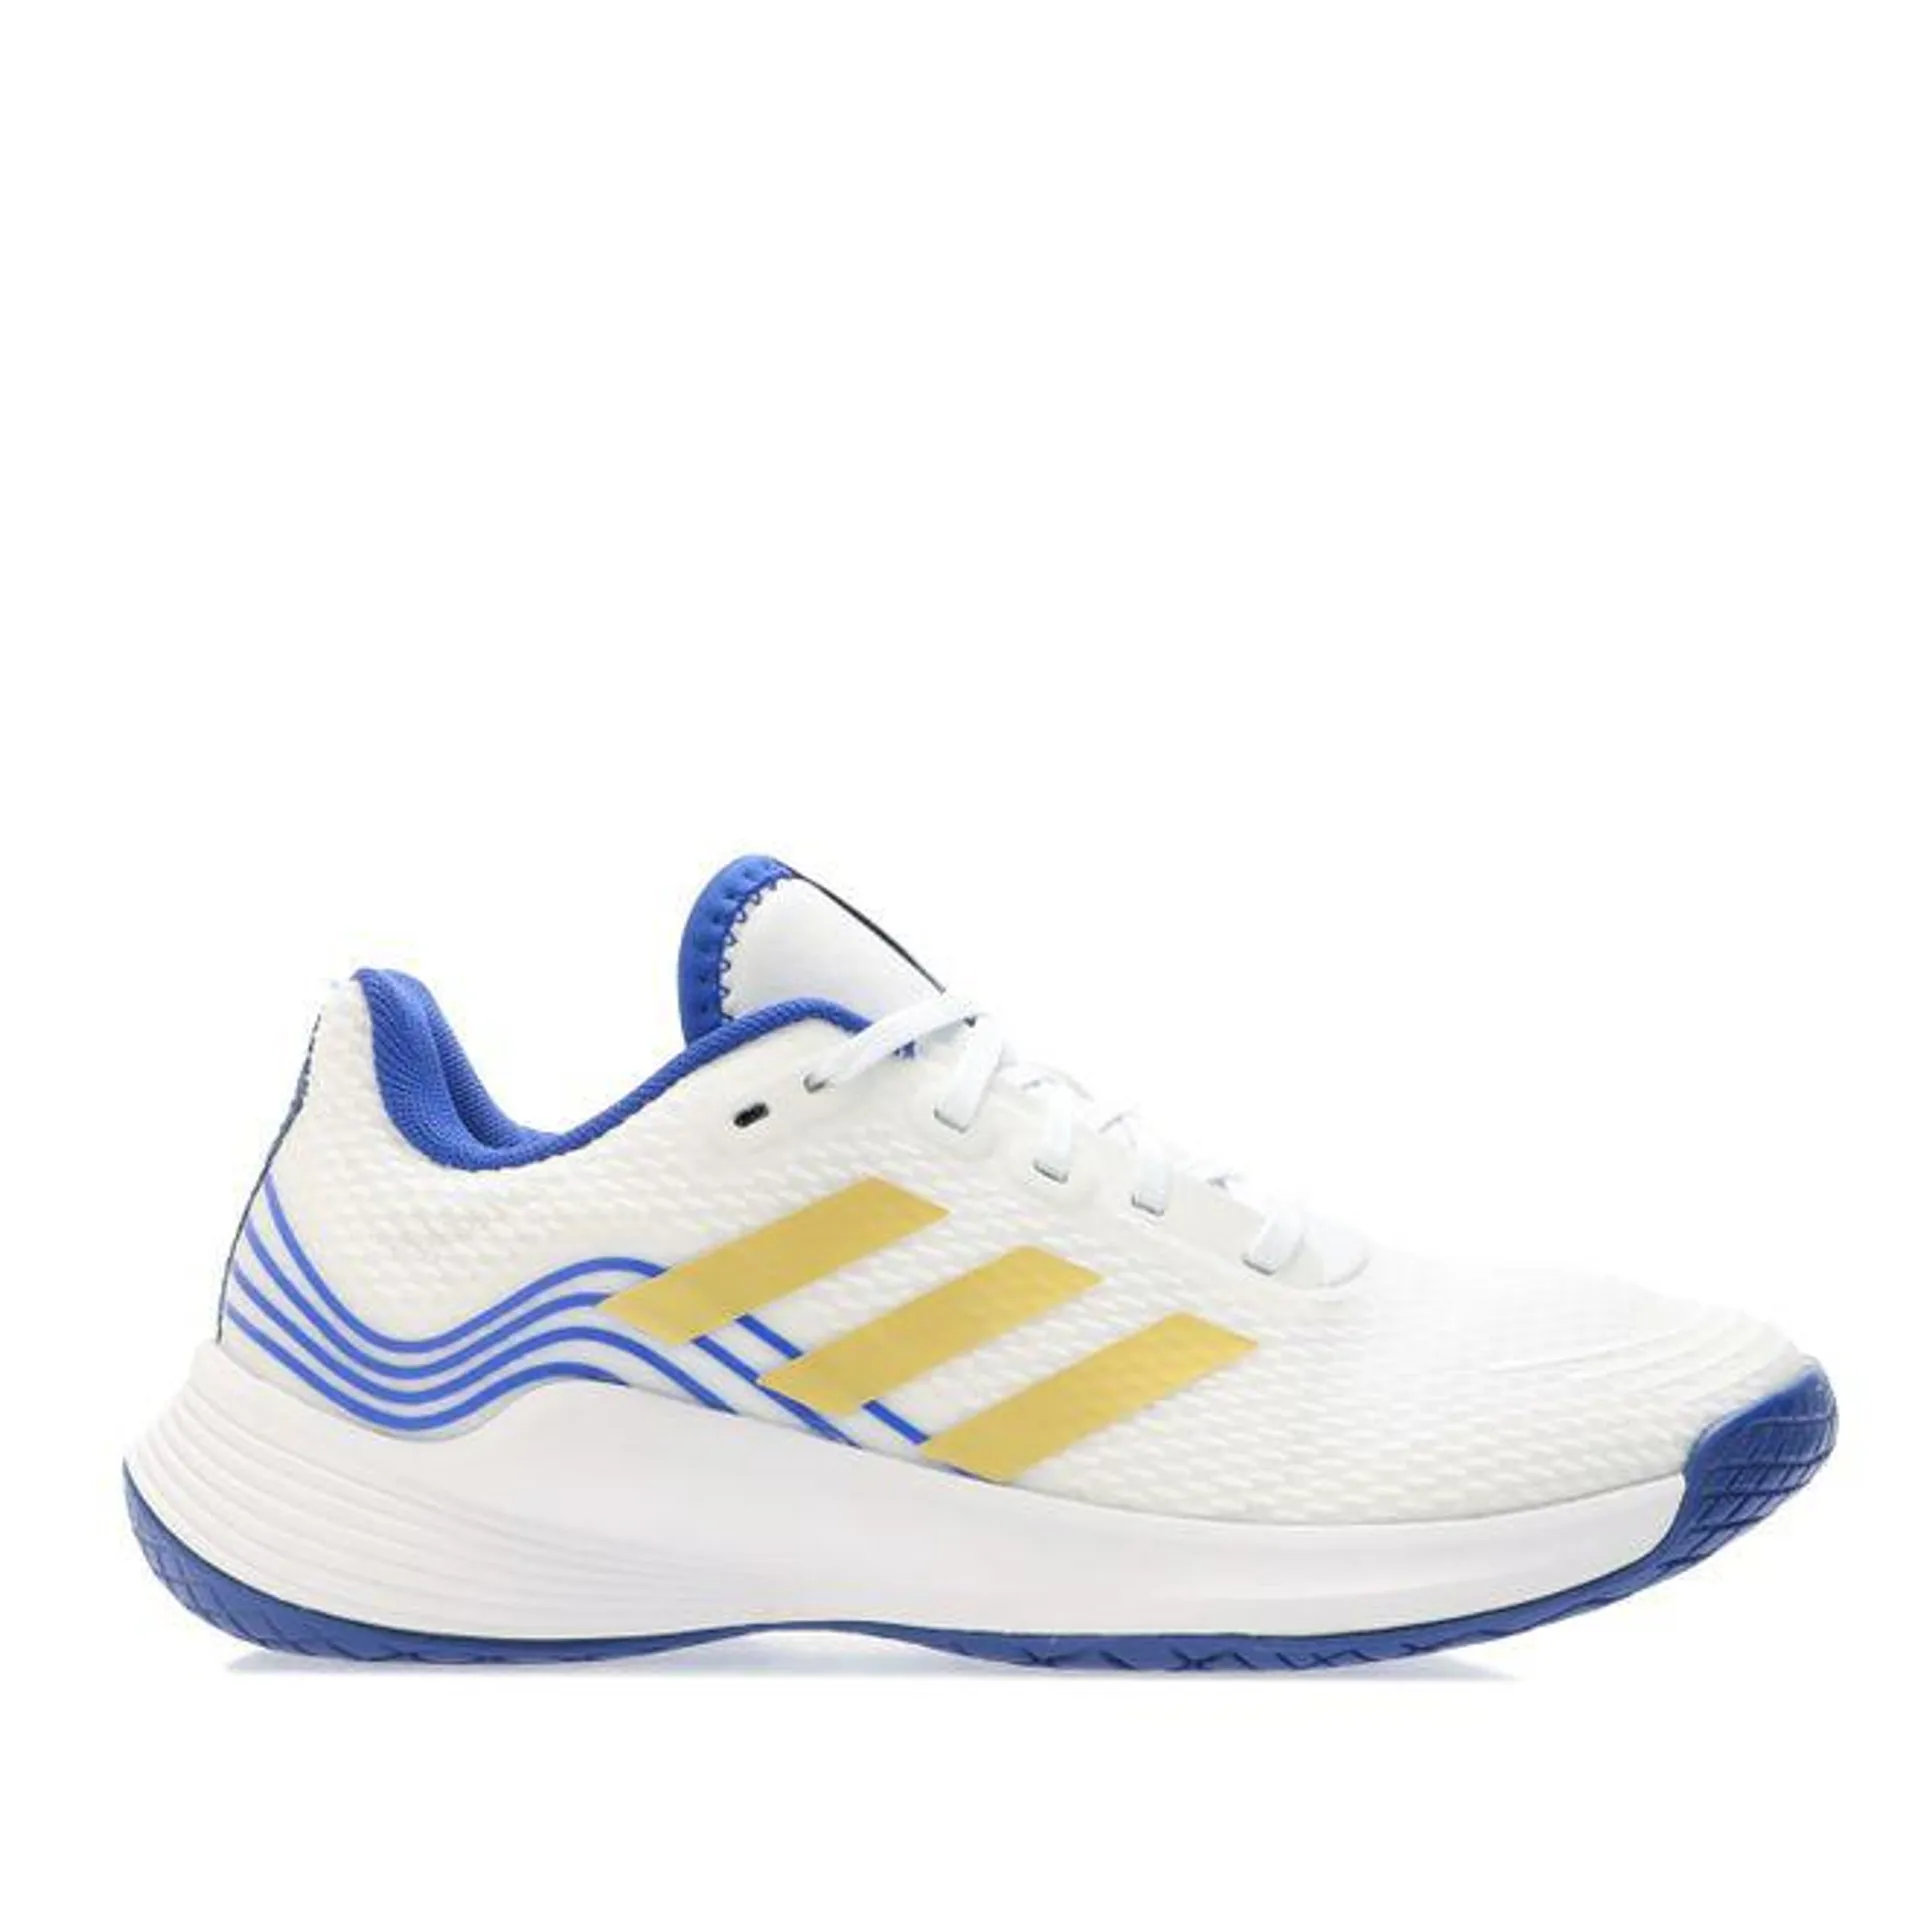 adidas Mens Novaflight Volleyball Trainers in White gold